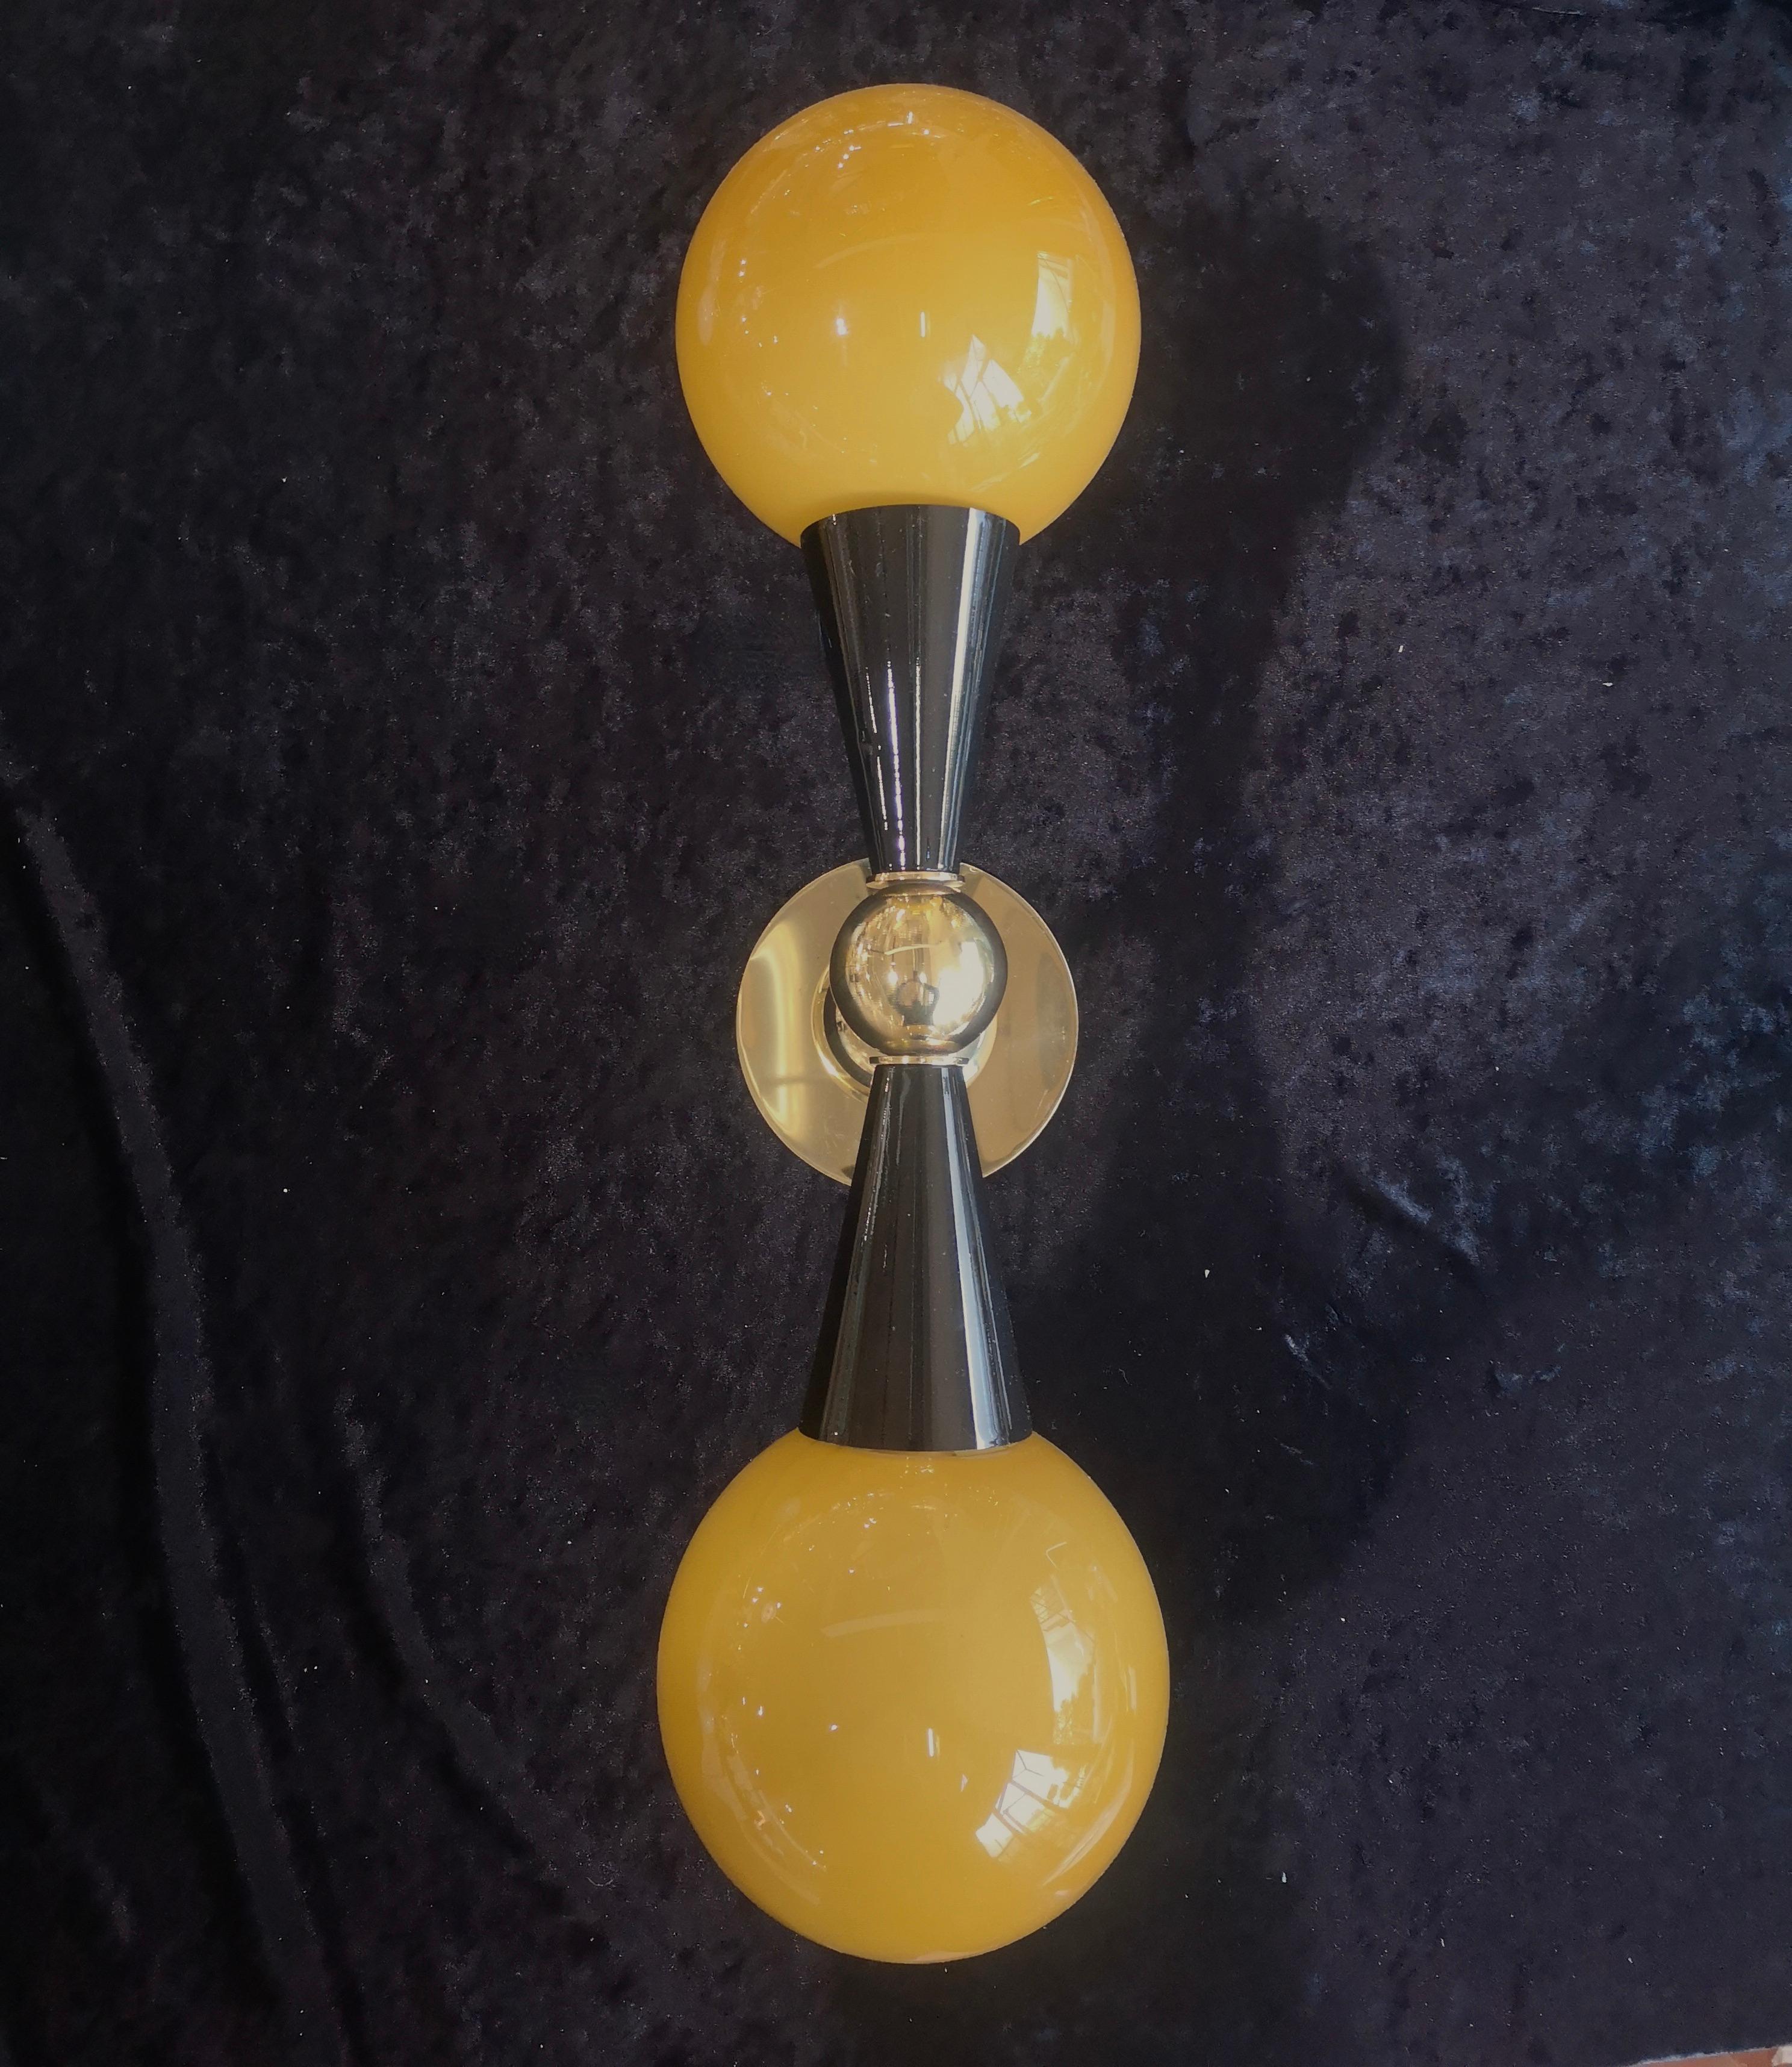 Refined and delicate design for this wall light with golden yellow Murano glass.

The applique are made up of a brass structure that allows the superimposed housing of two beautiful Murano glass spheres of a golden yellow color. The design is very